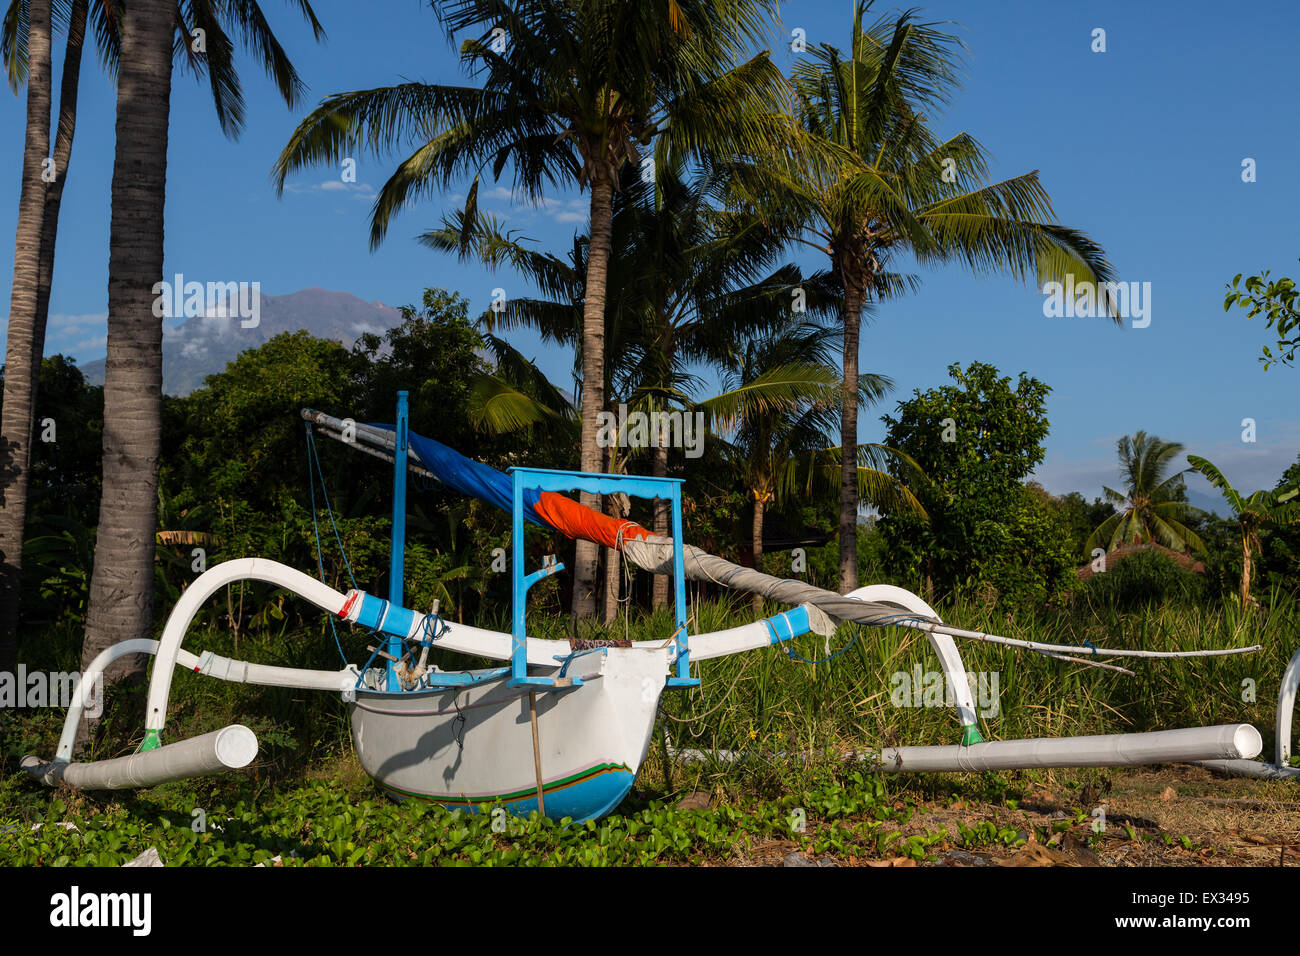 A colorful jukung boat rests on the beach in Bali, Indonesia. Stock Photo